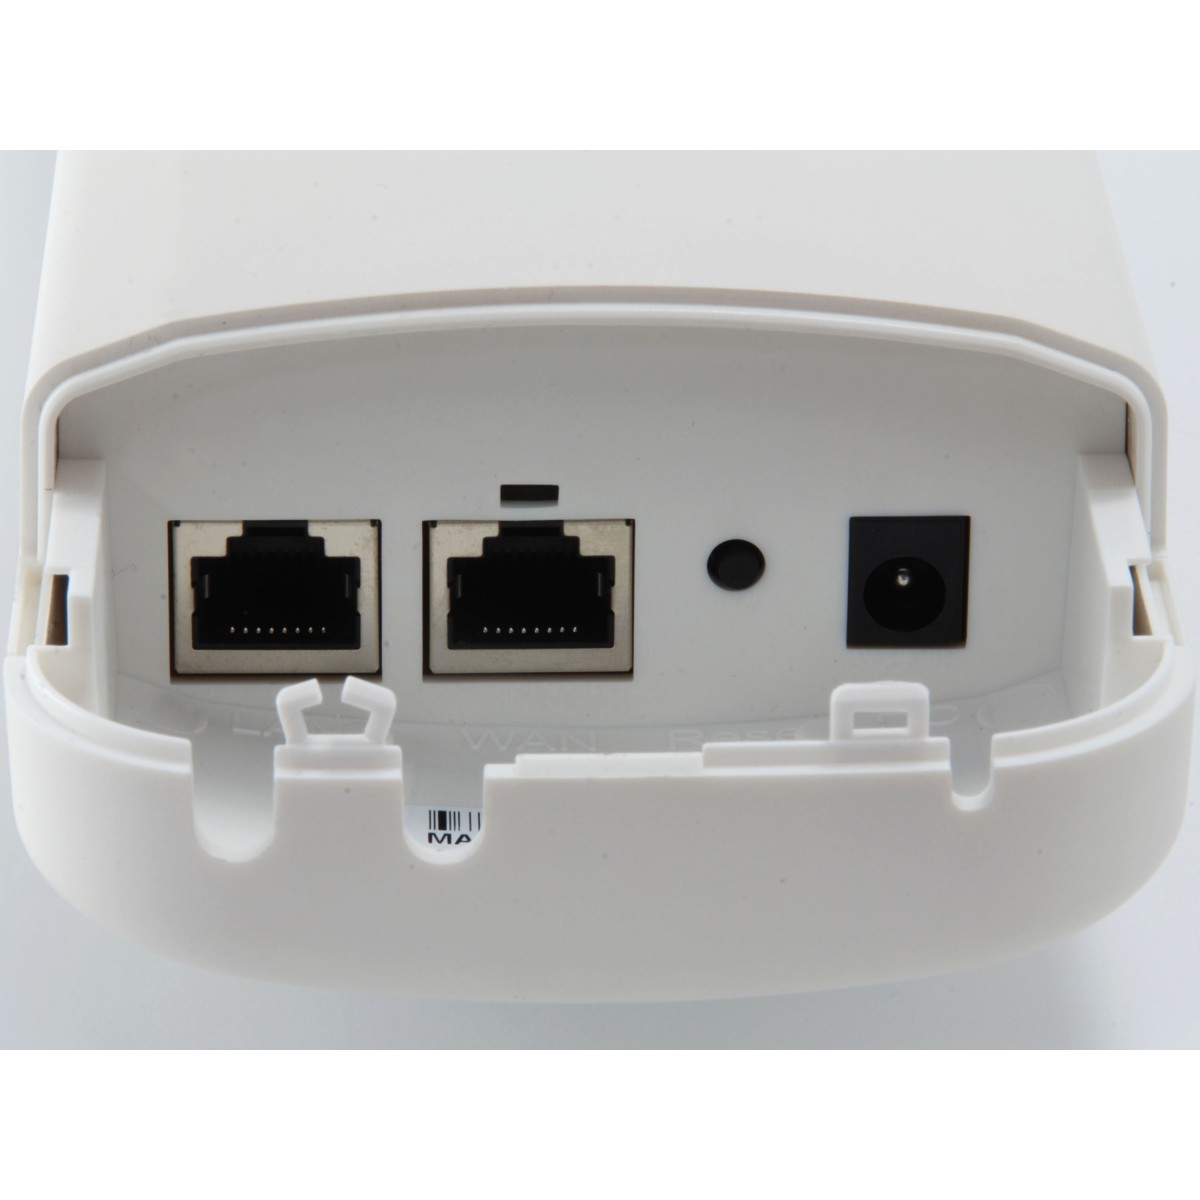 LevelOne N300 Outdoor PoE Wireless Access Point - Controller Managed - 100 Mbit/s - 300 Mbit/s - 10,100 Mbit/s - 2.4 - 2.4835 GH